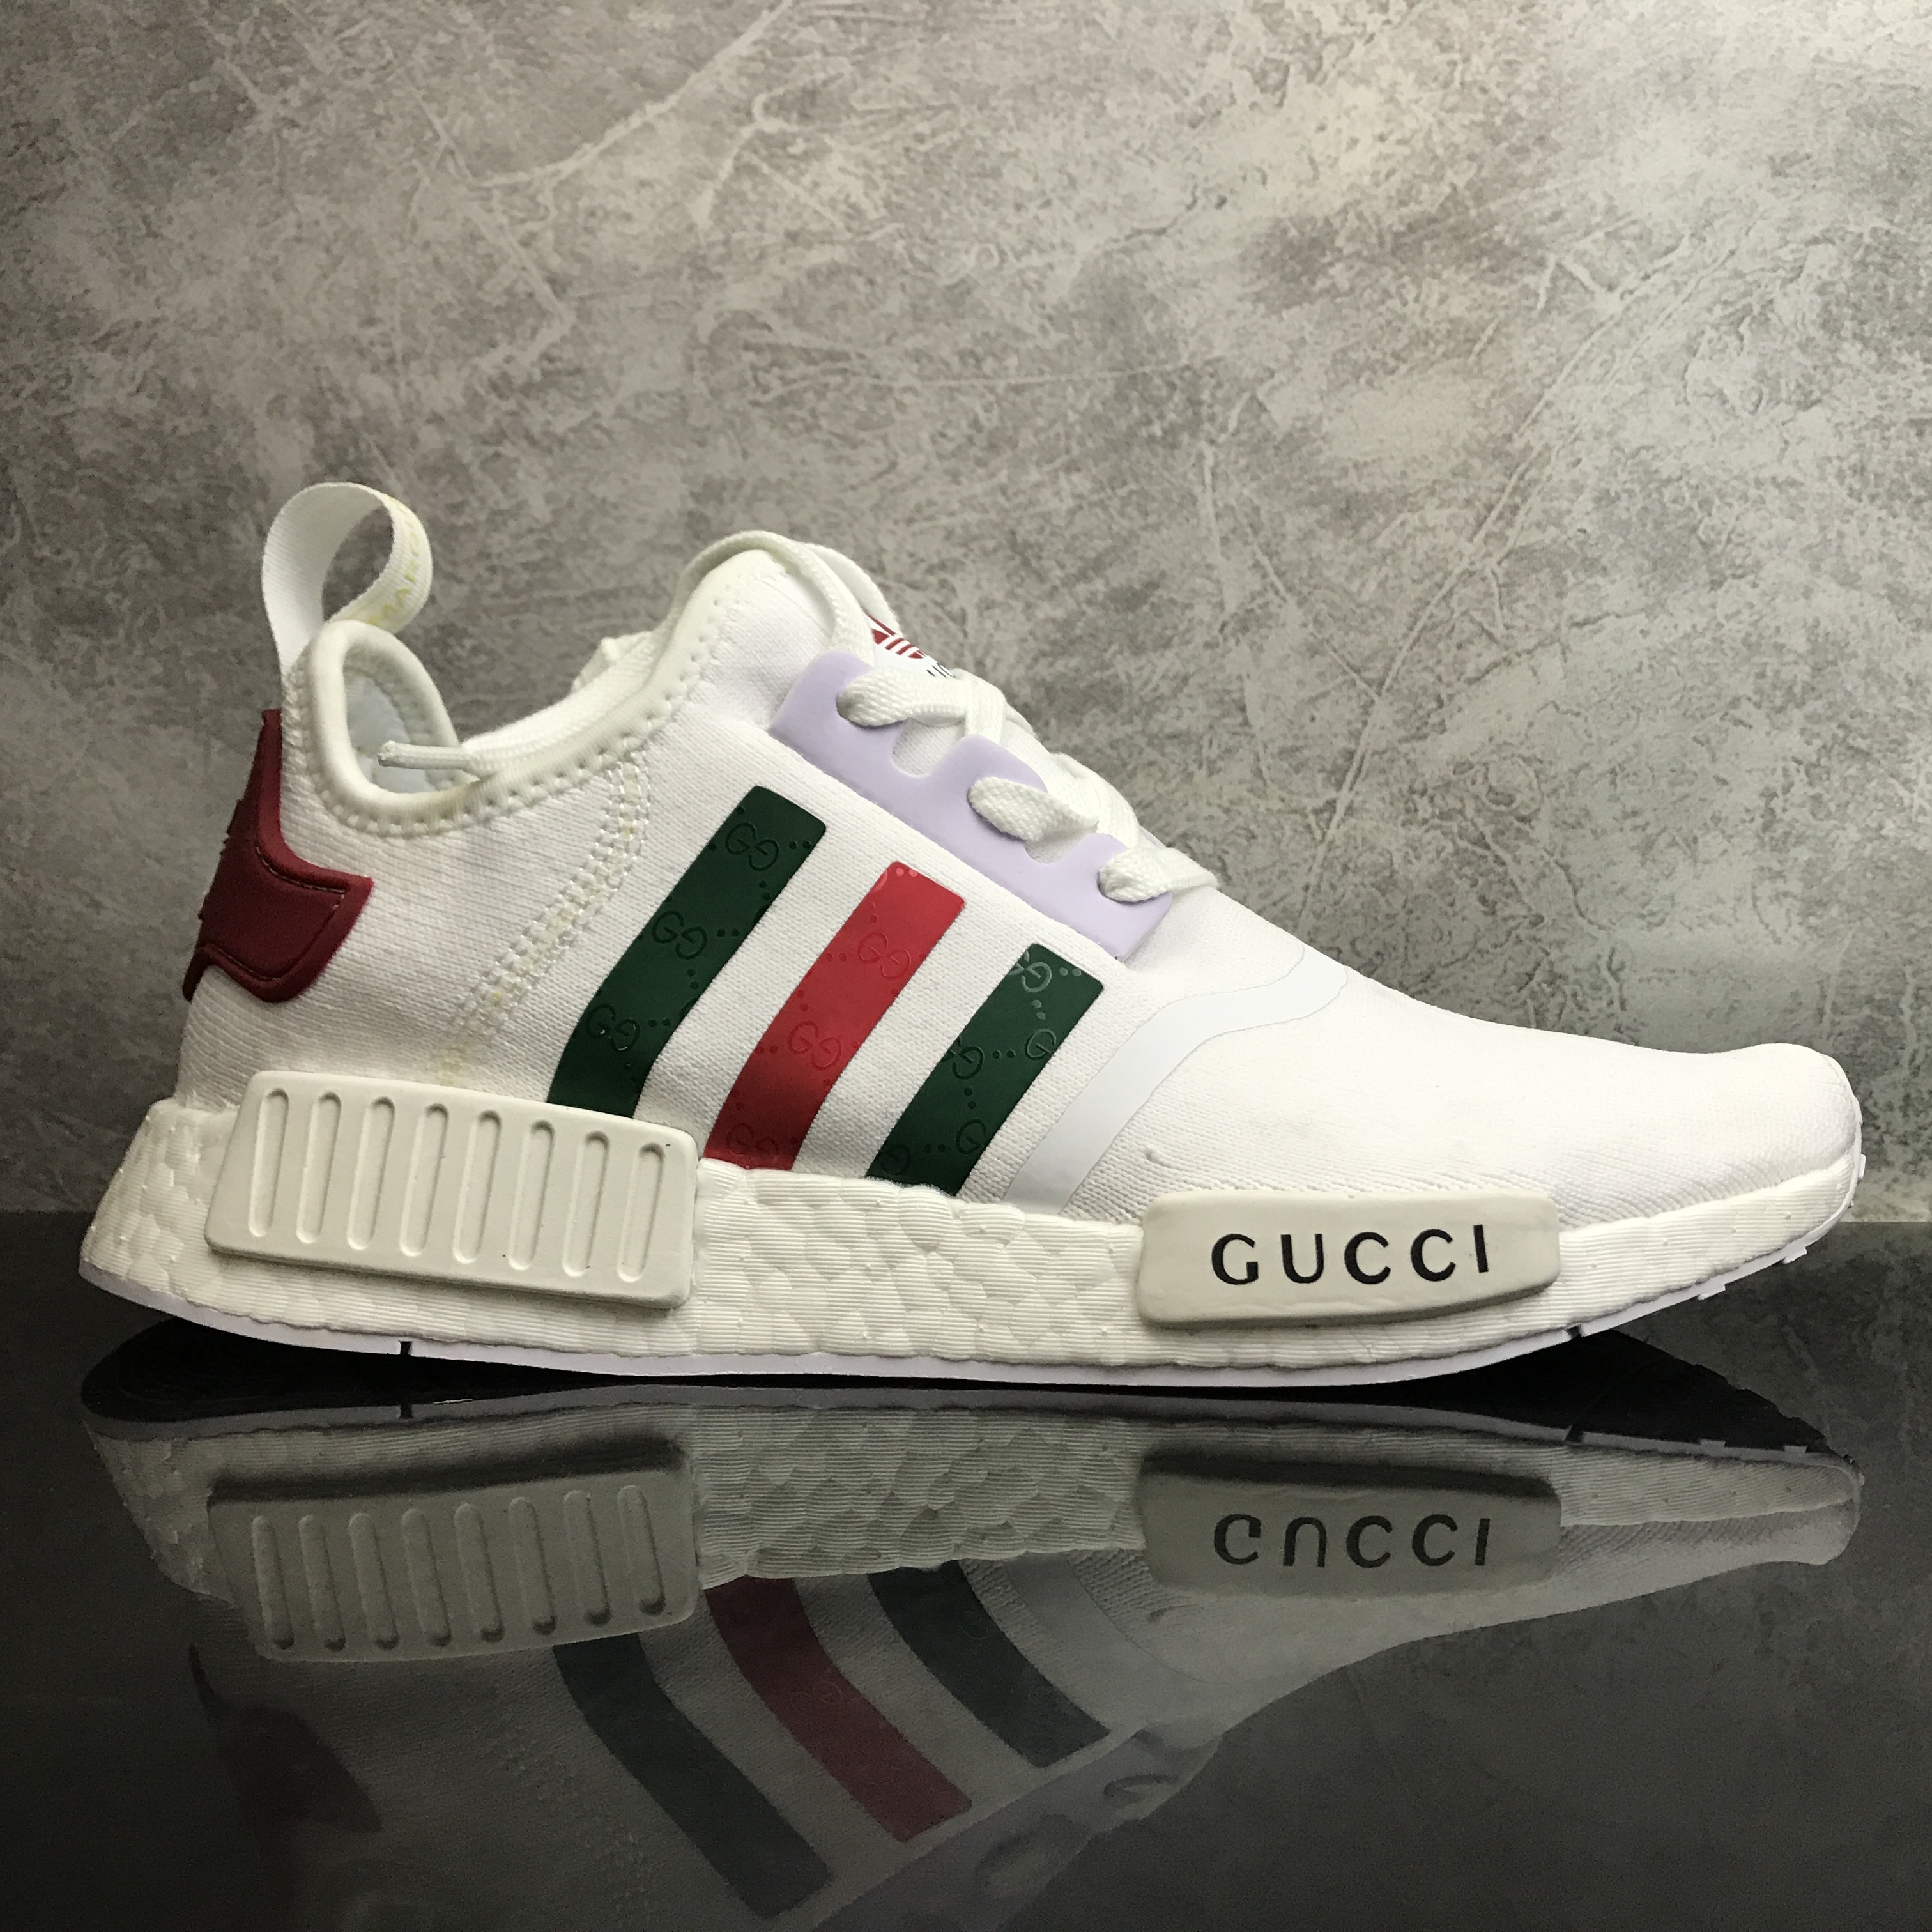 Classic Gucci inspired Adidas NMD Shoes Tenis